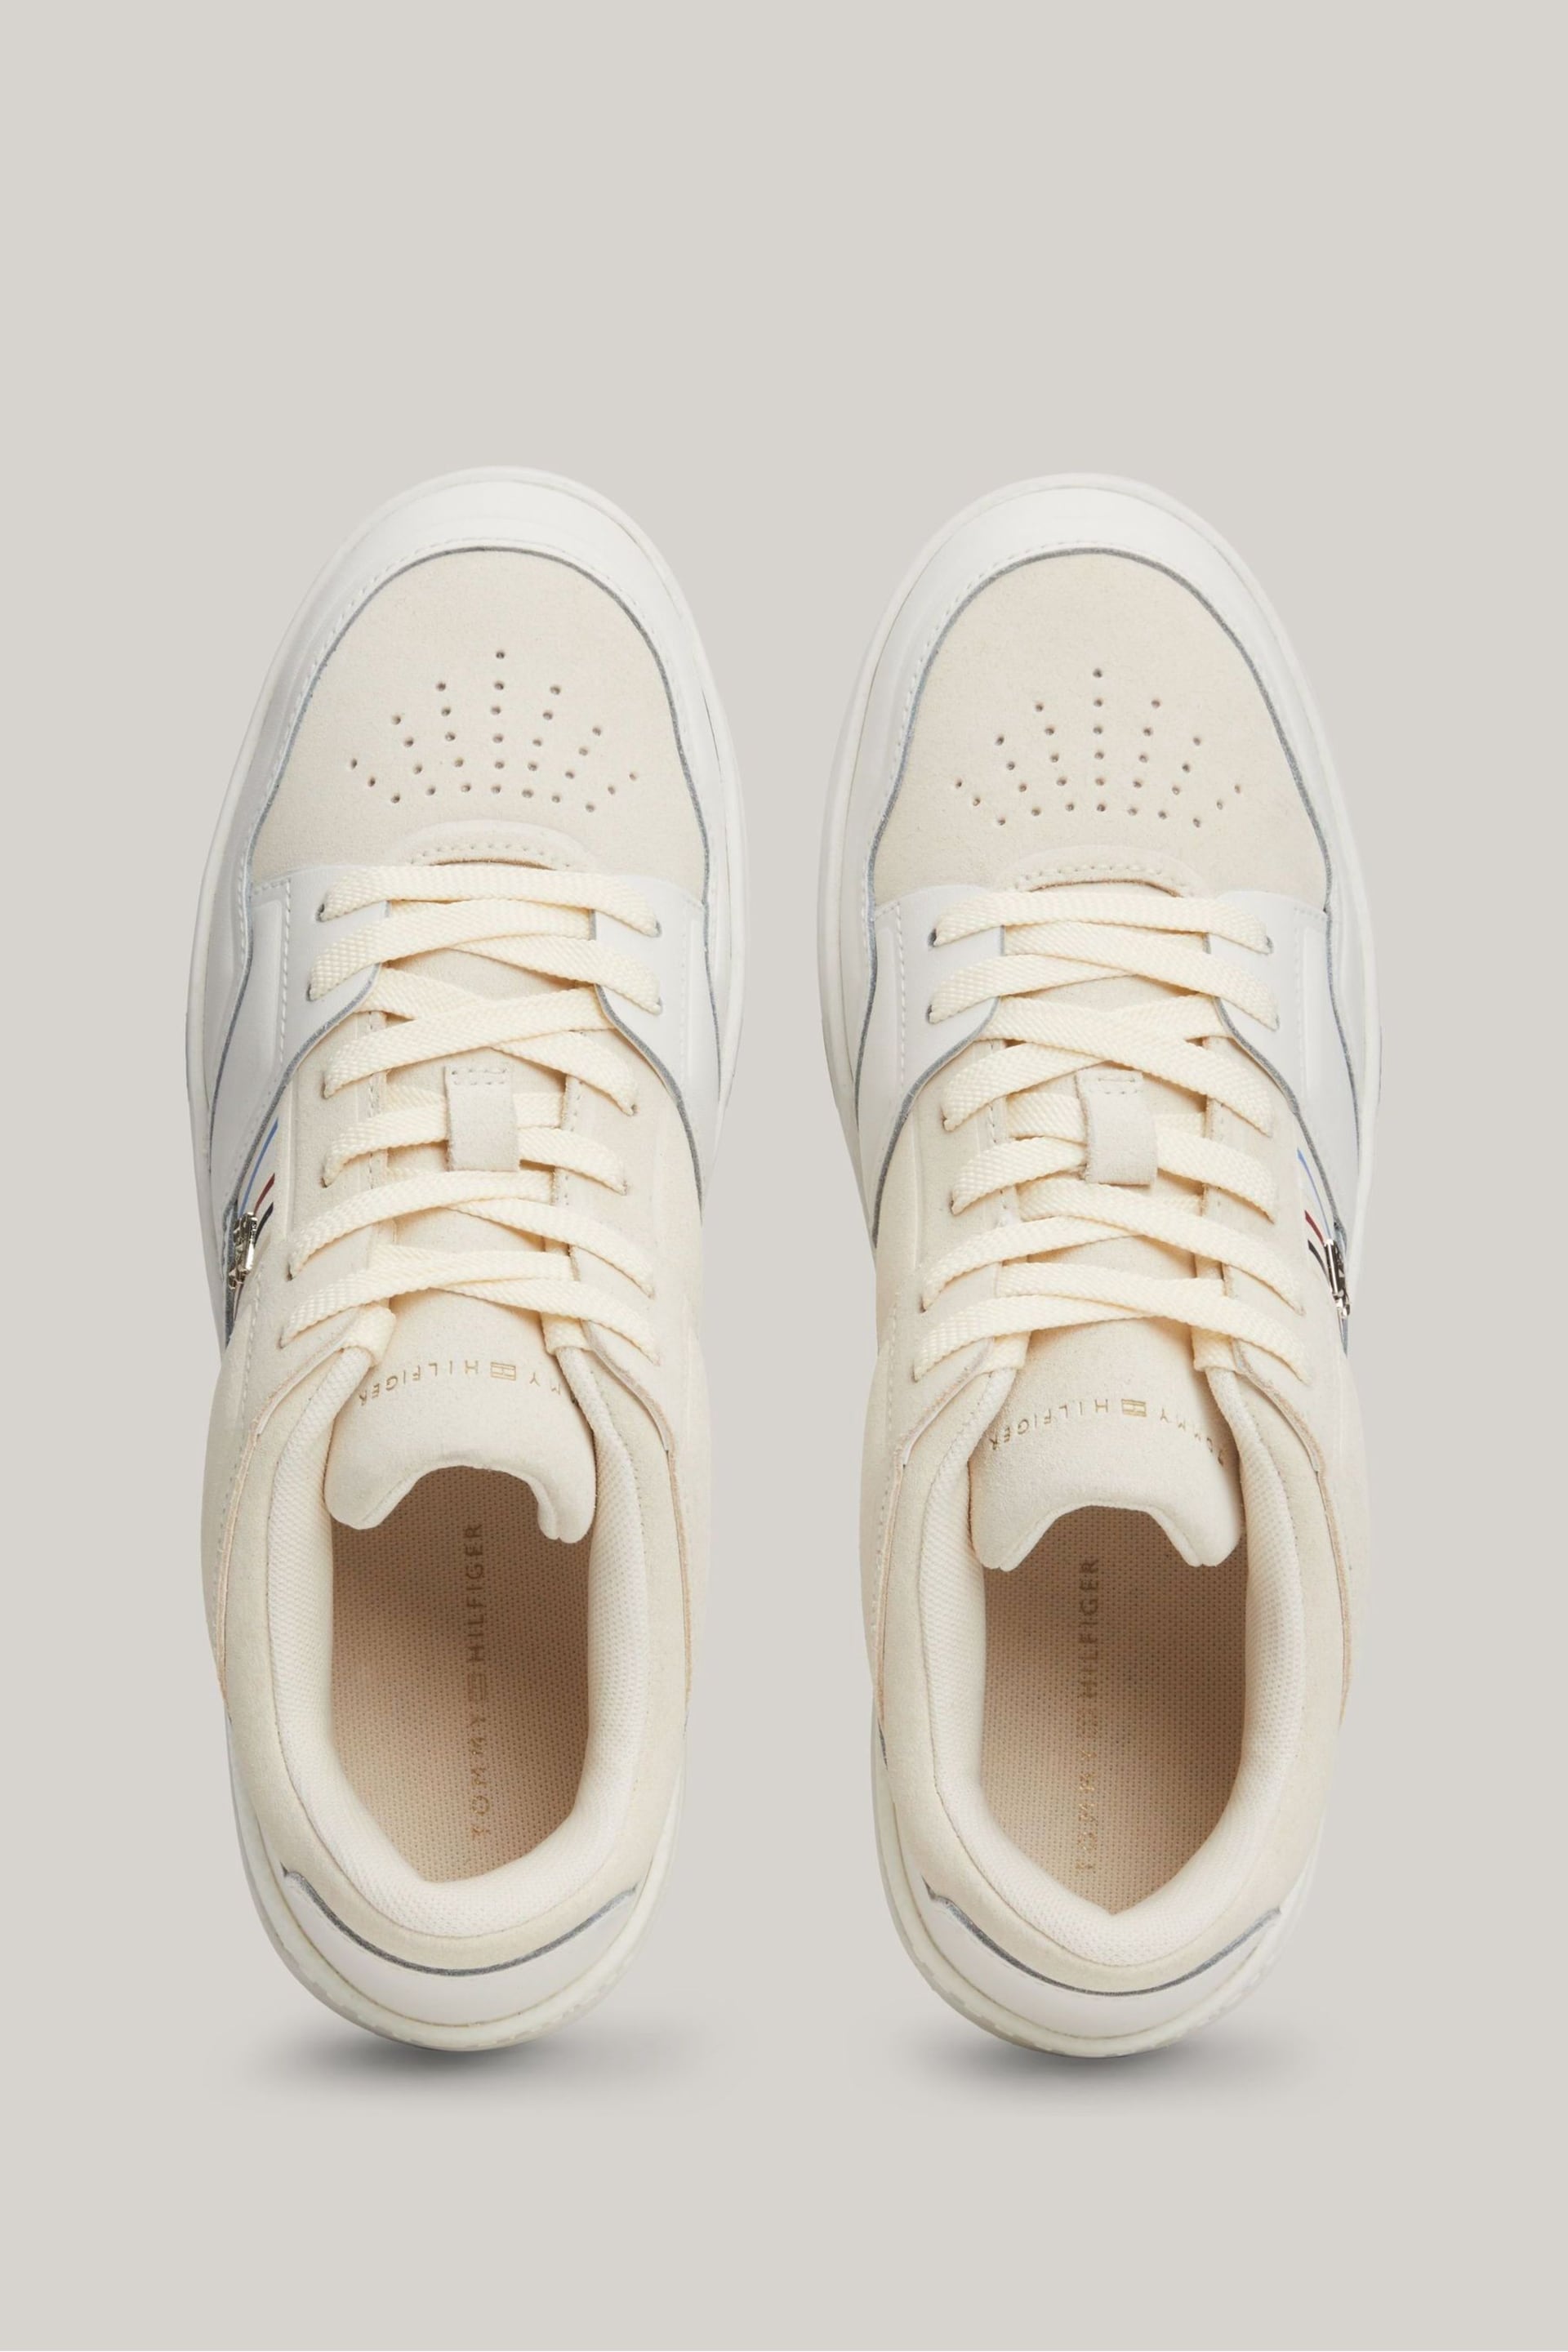 Tommy Hilfiger Cream Suede Stripes Low Top Sneakers - Image 4 of 6